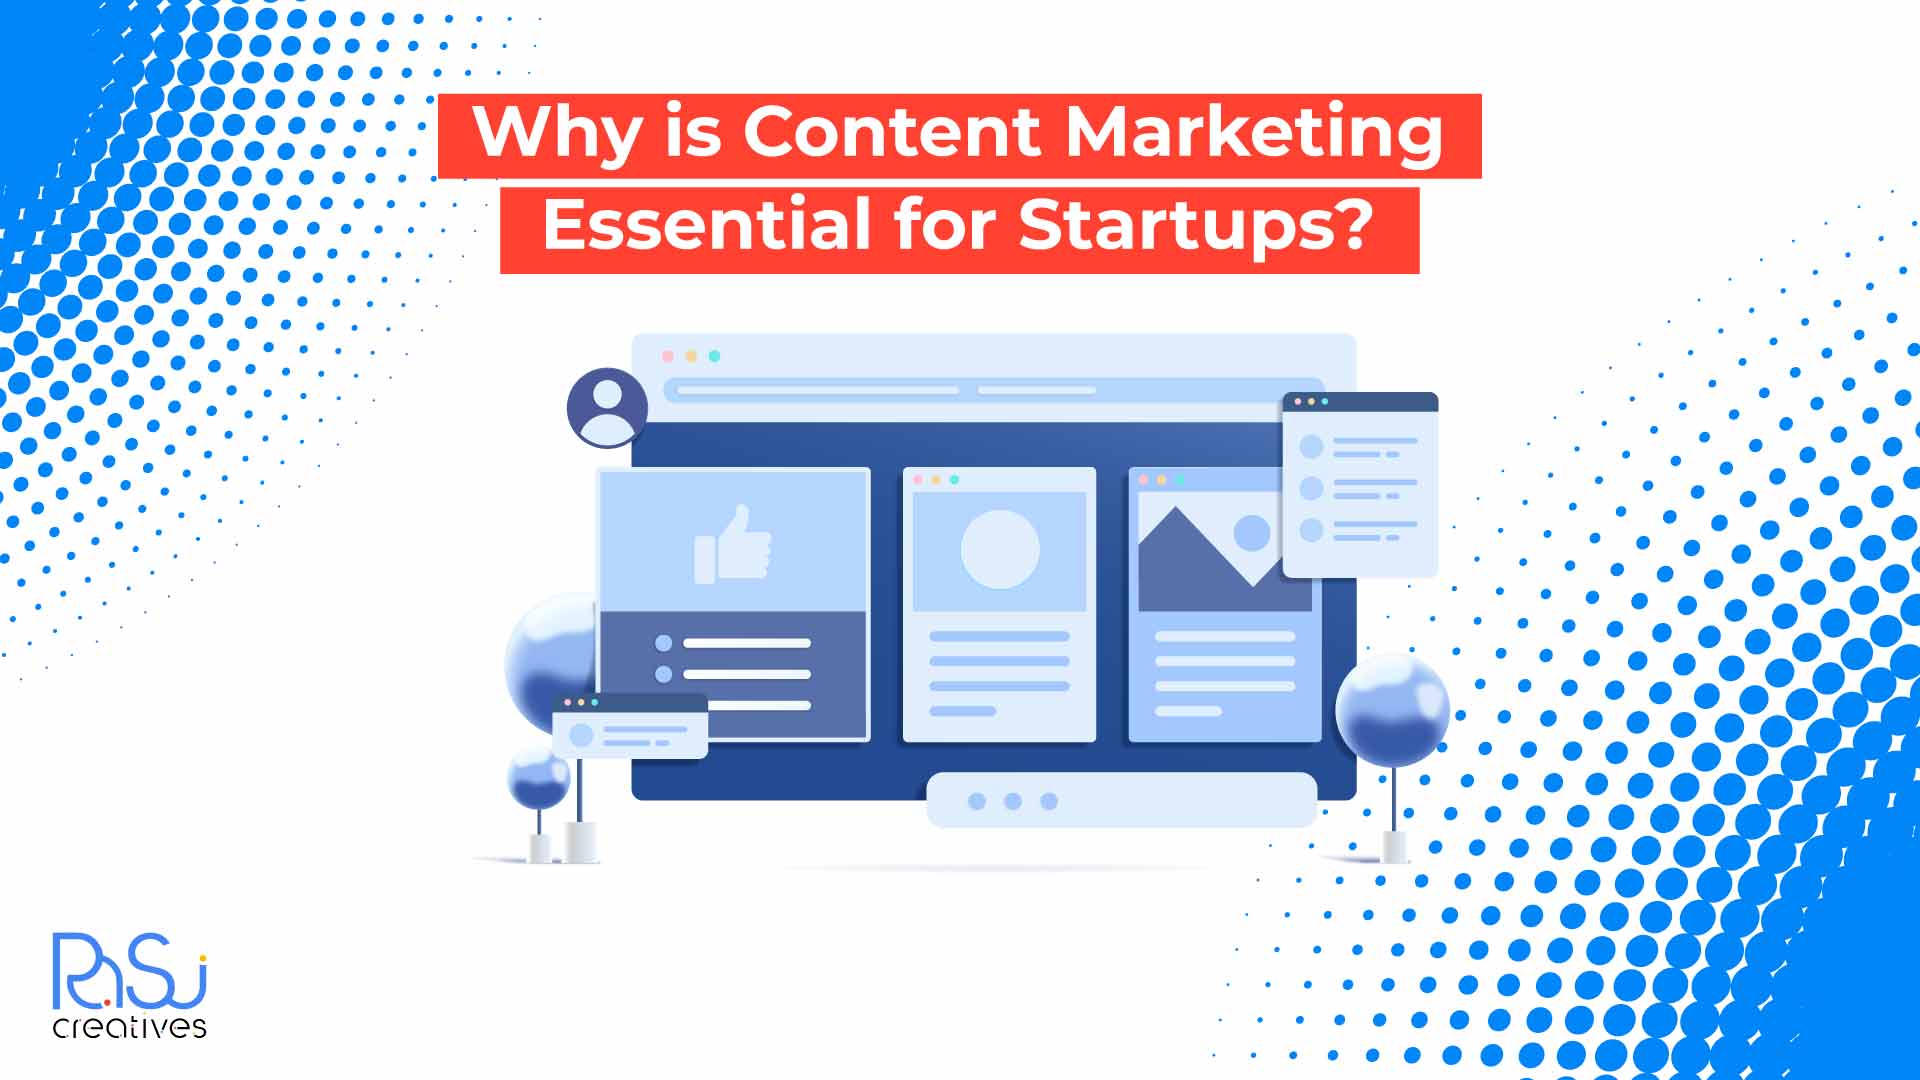 Why is Content Marketing Essential for Startups?